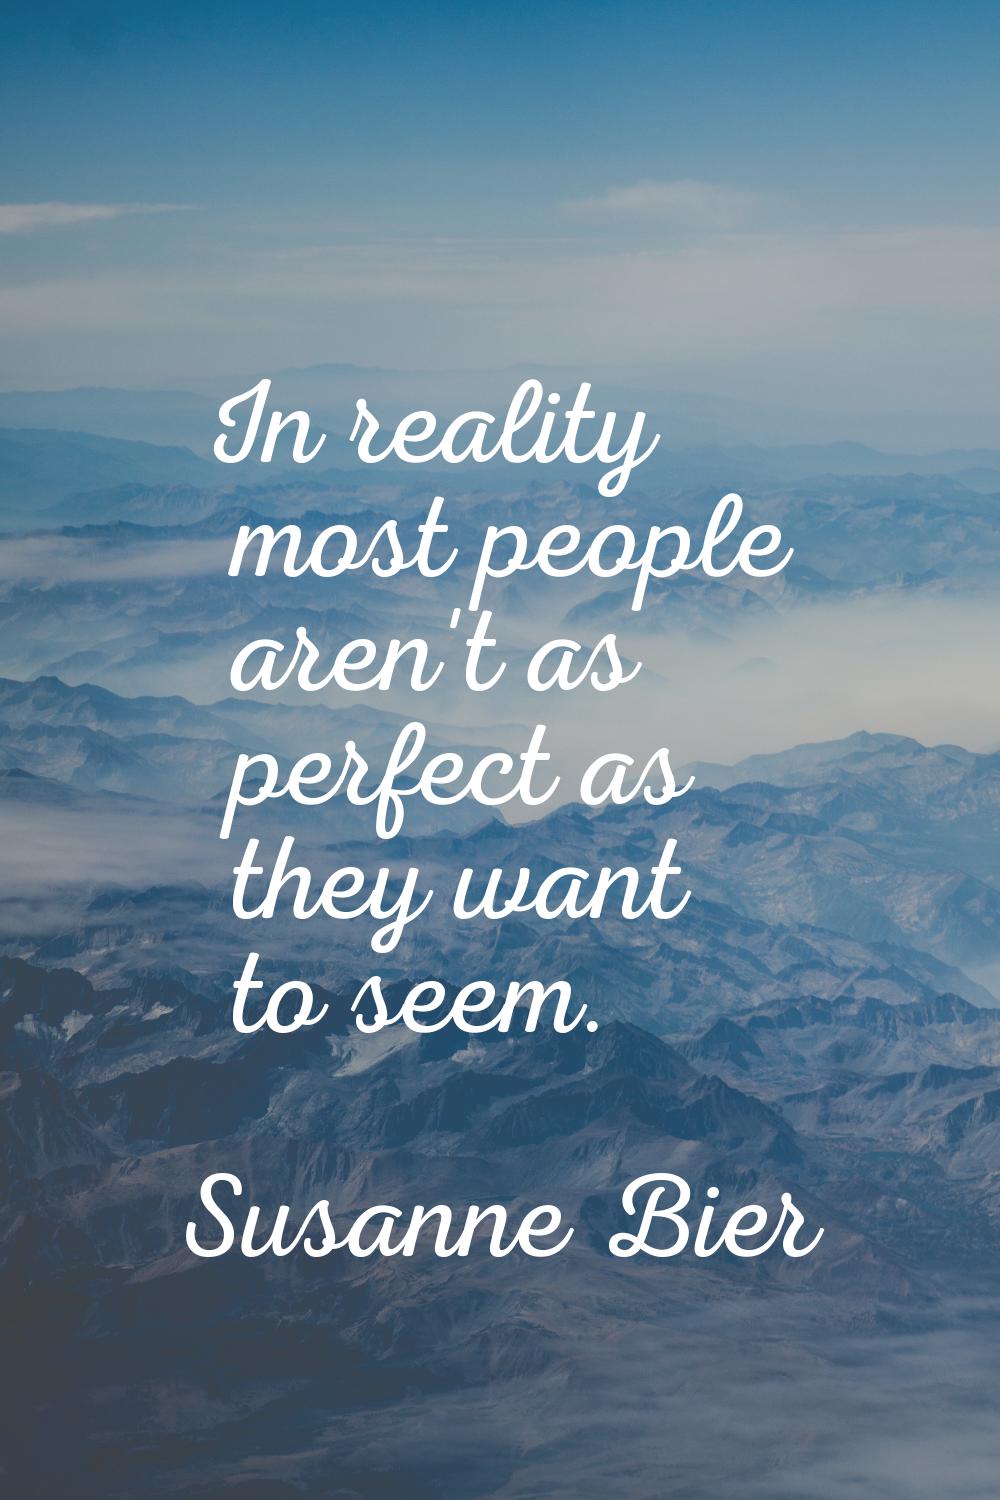 In reality most people aren't as perfect as they want to seem.